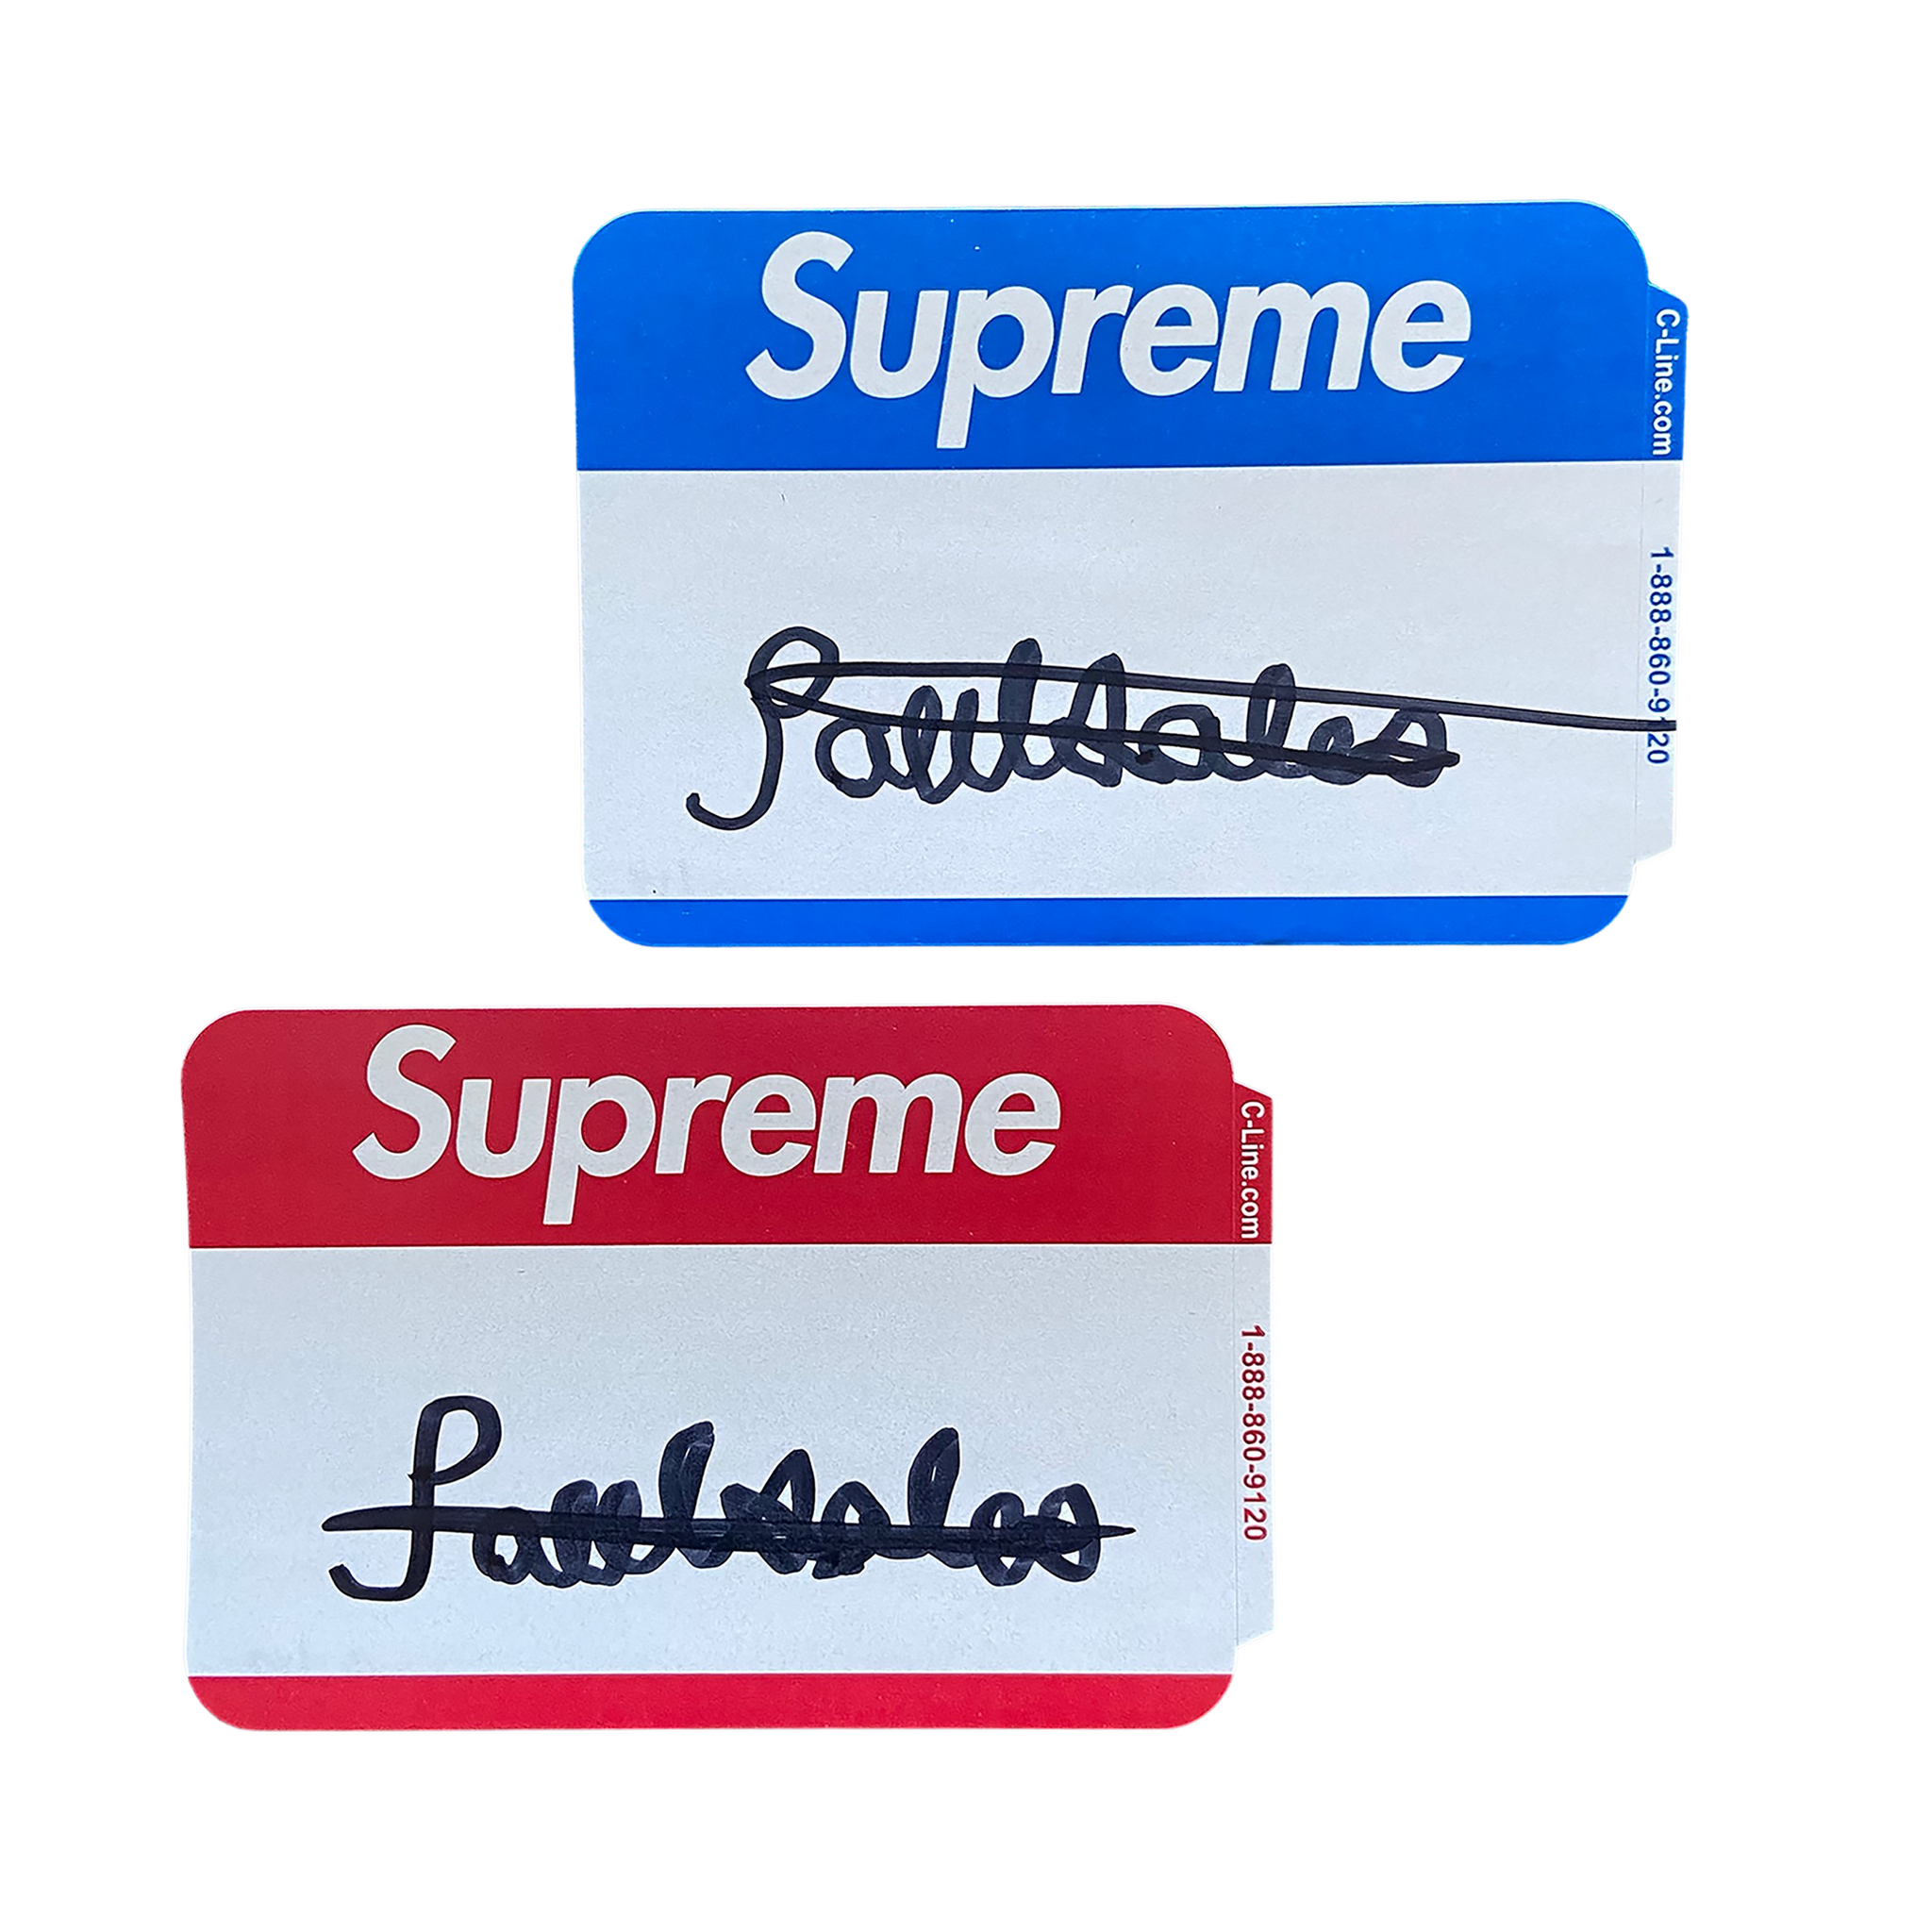 Paul Soles Signed Supreme Stickers